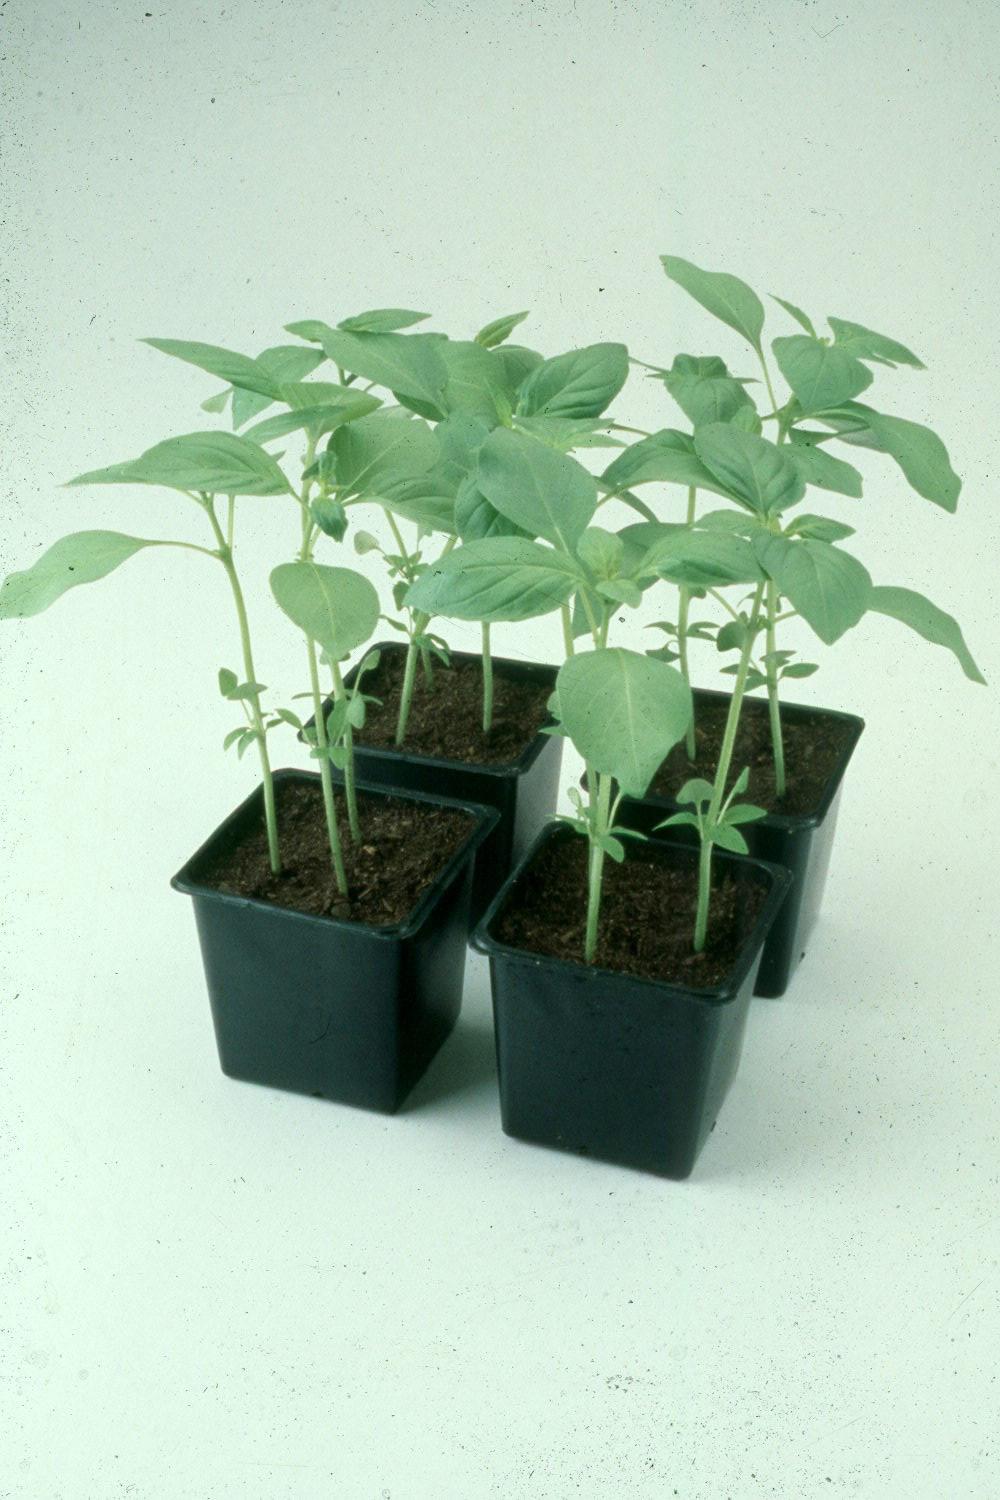 By transplanting certain plants such as this basil, gardens can harvest a crop much sooner than by growing plants from seed.